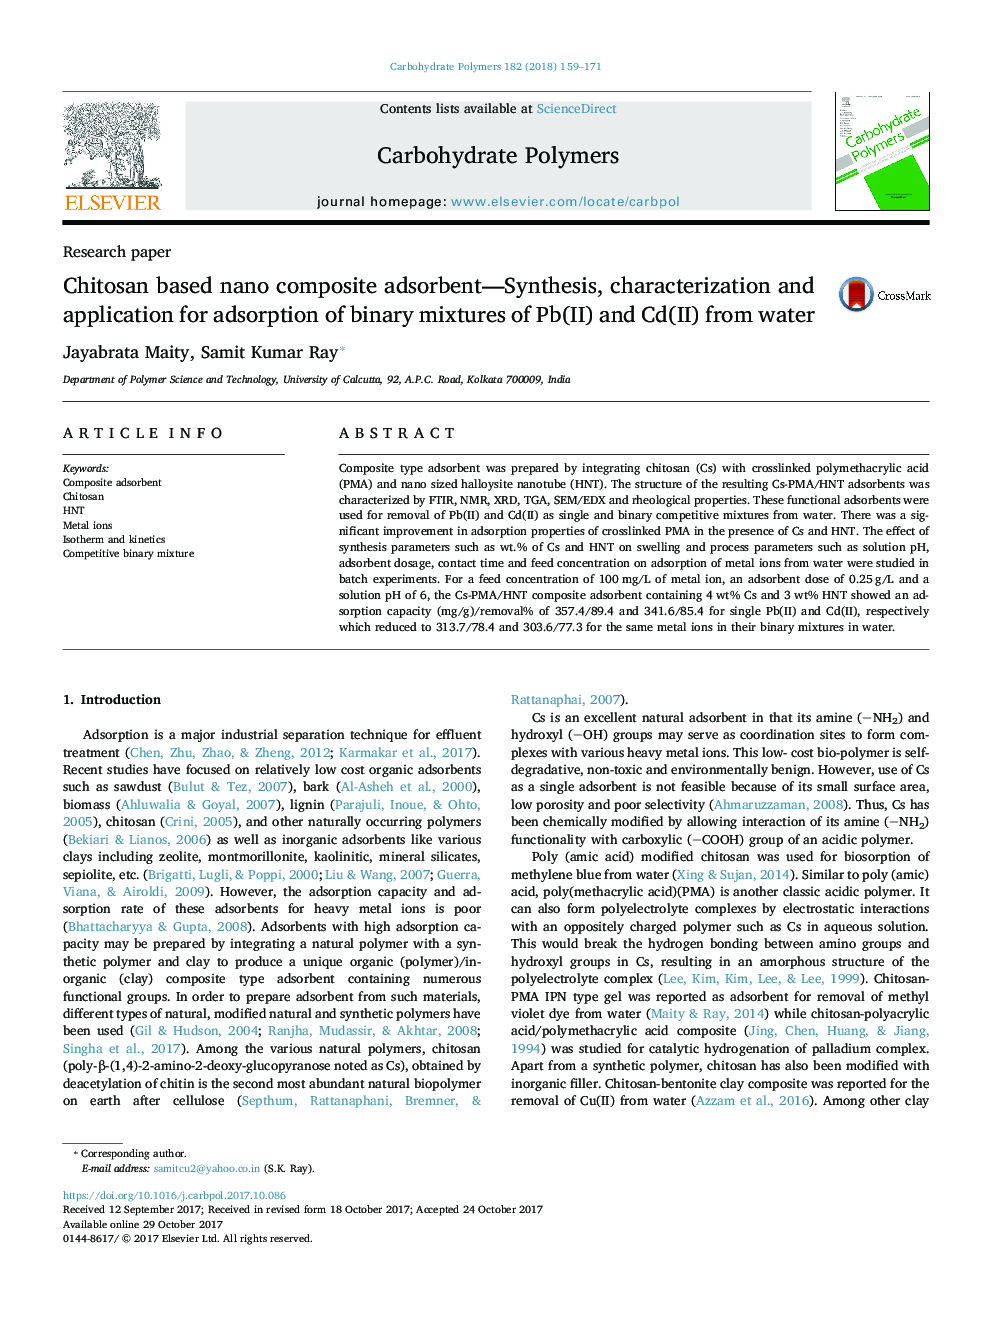 Chitosan based nano composite adsorbent-Synthesis, characterization and application for adsorption of binary mixtures of Pb(II) and Cd(II) from water